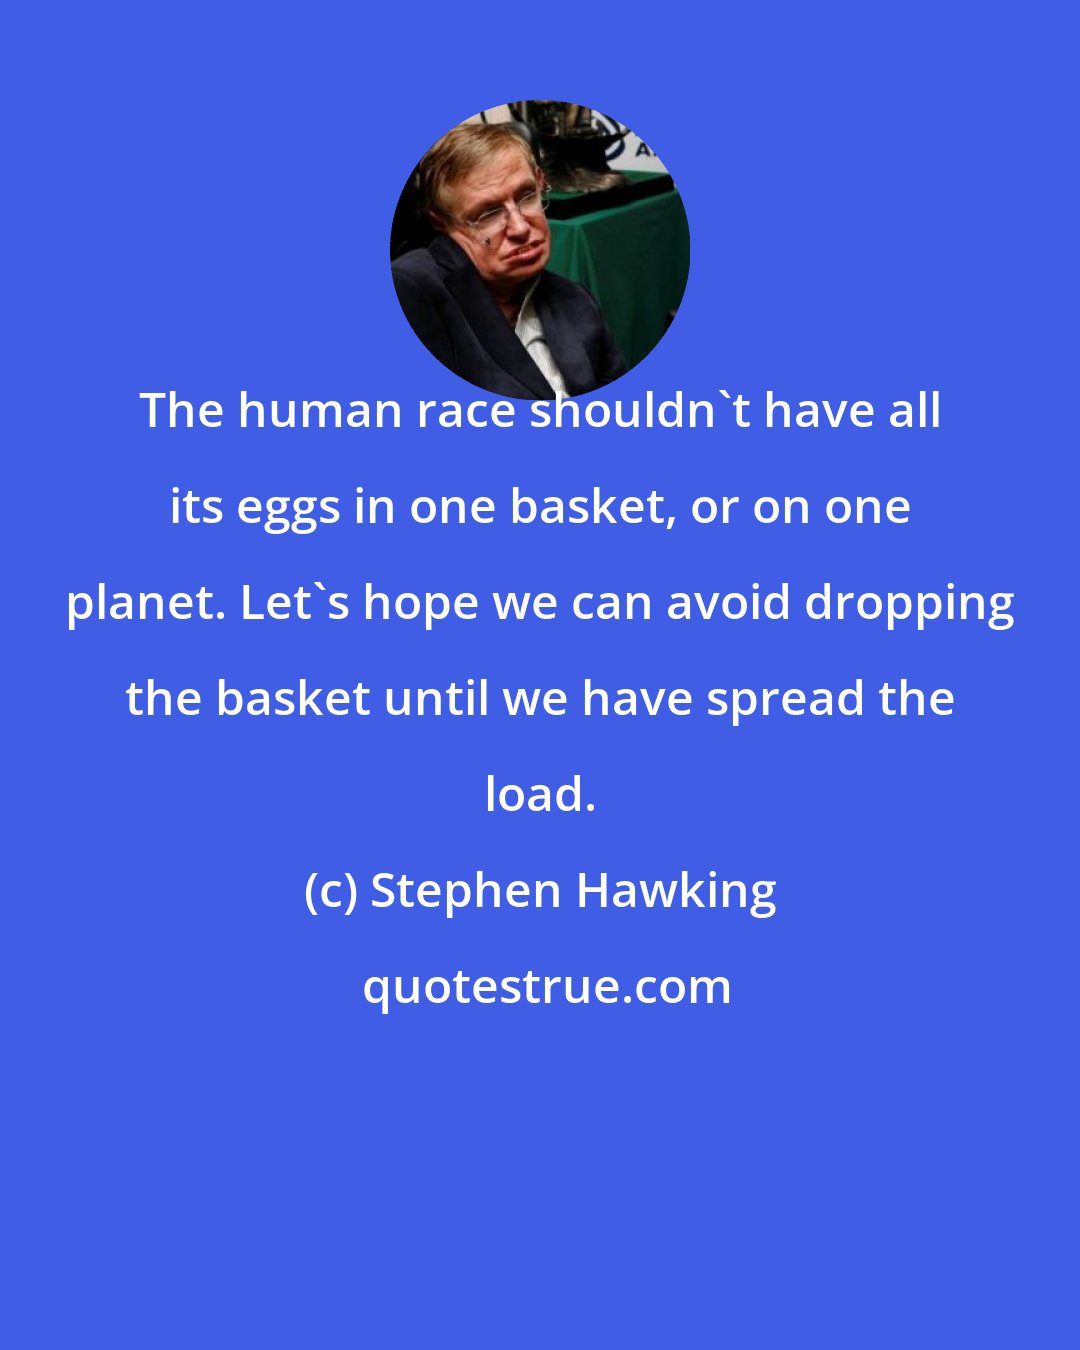 Stephen Hawking: The human race shouldn't have all its eggs in one basket, or on one planet. Let's hope we can avoid dropping the basket until we have spread the load.